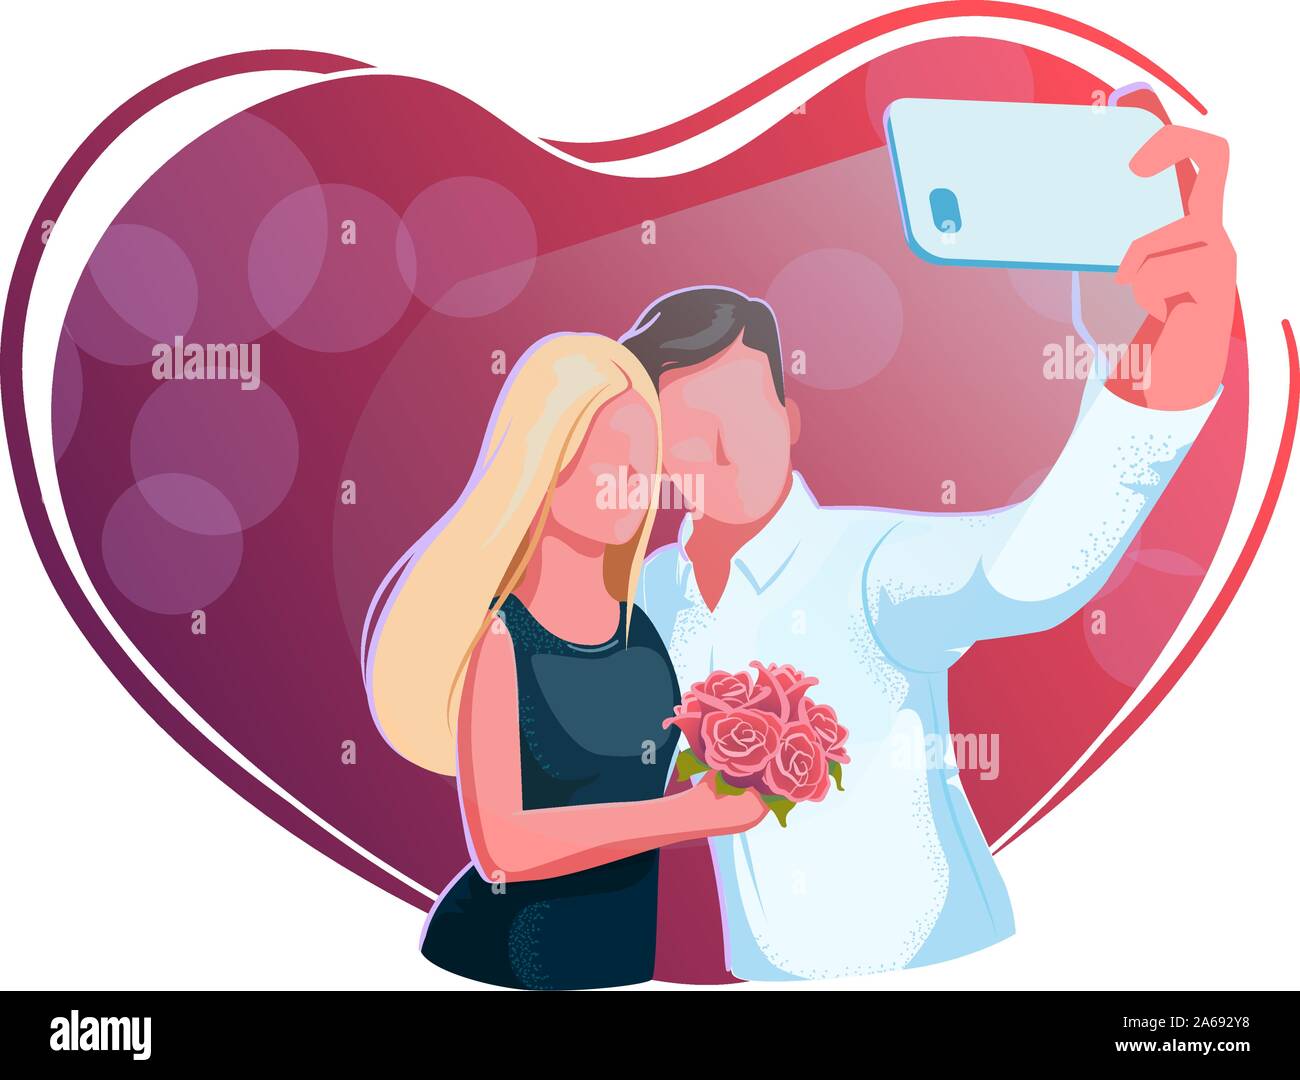 Beautiful young couple taking selfie on date. Valentine day, guy and girl with roses make relfie on a red background. Love, engagement, wedding concept. Love heart frame. Romantic celebration design. Stock Vector